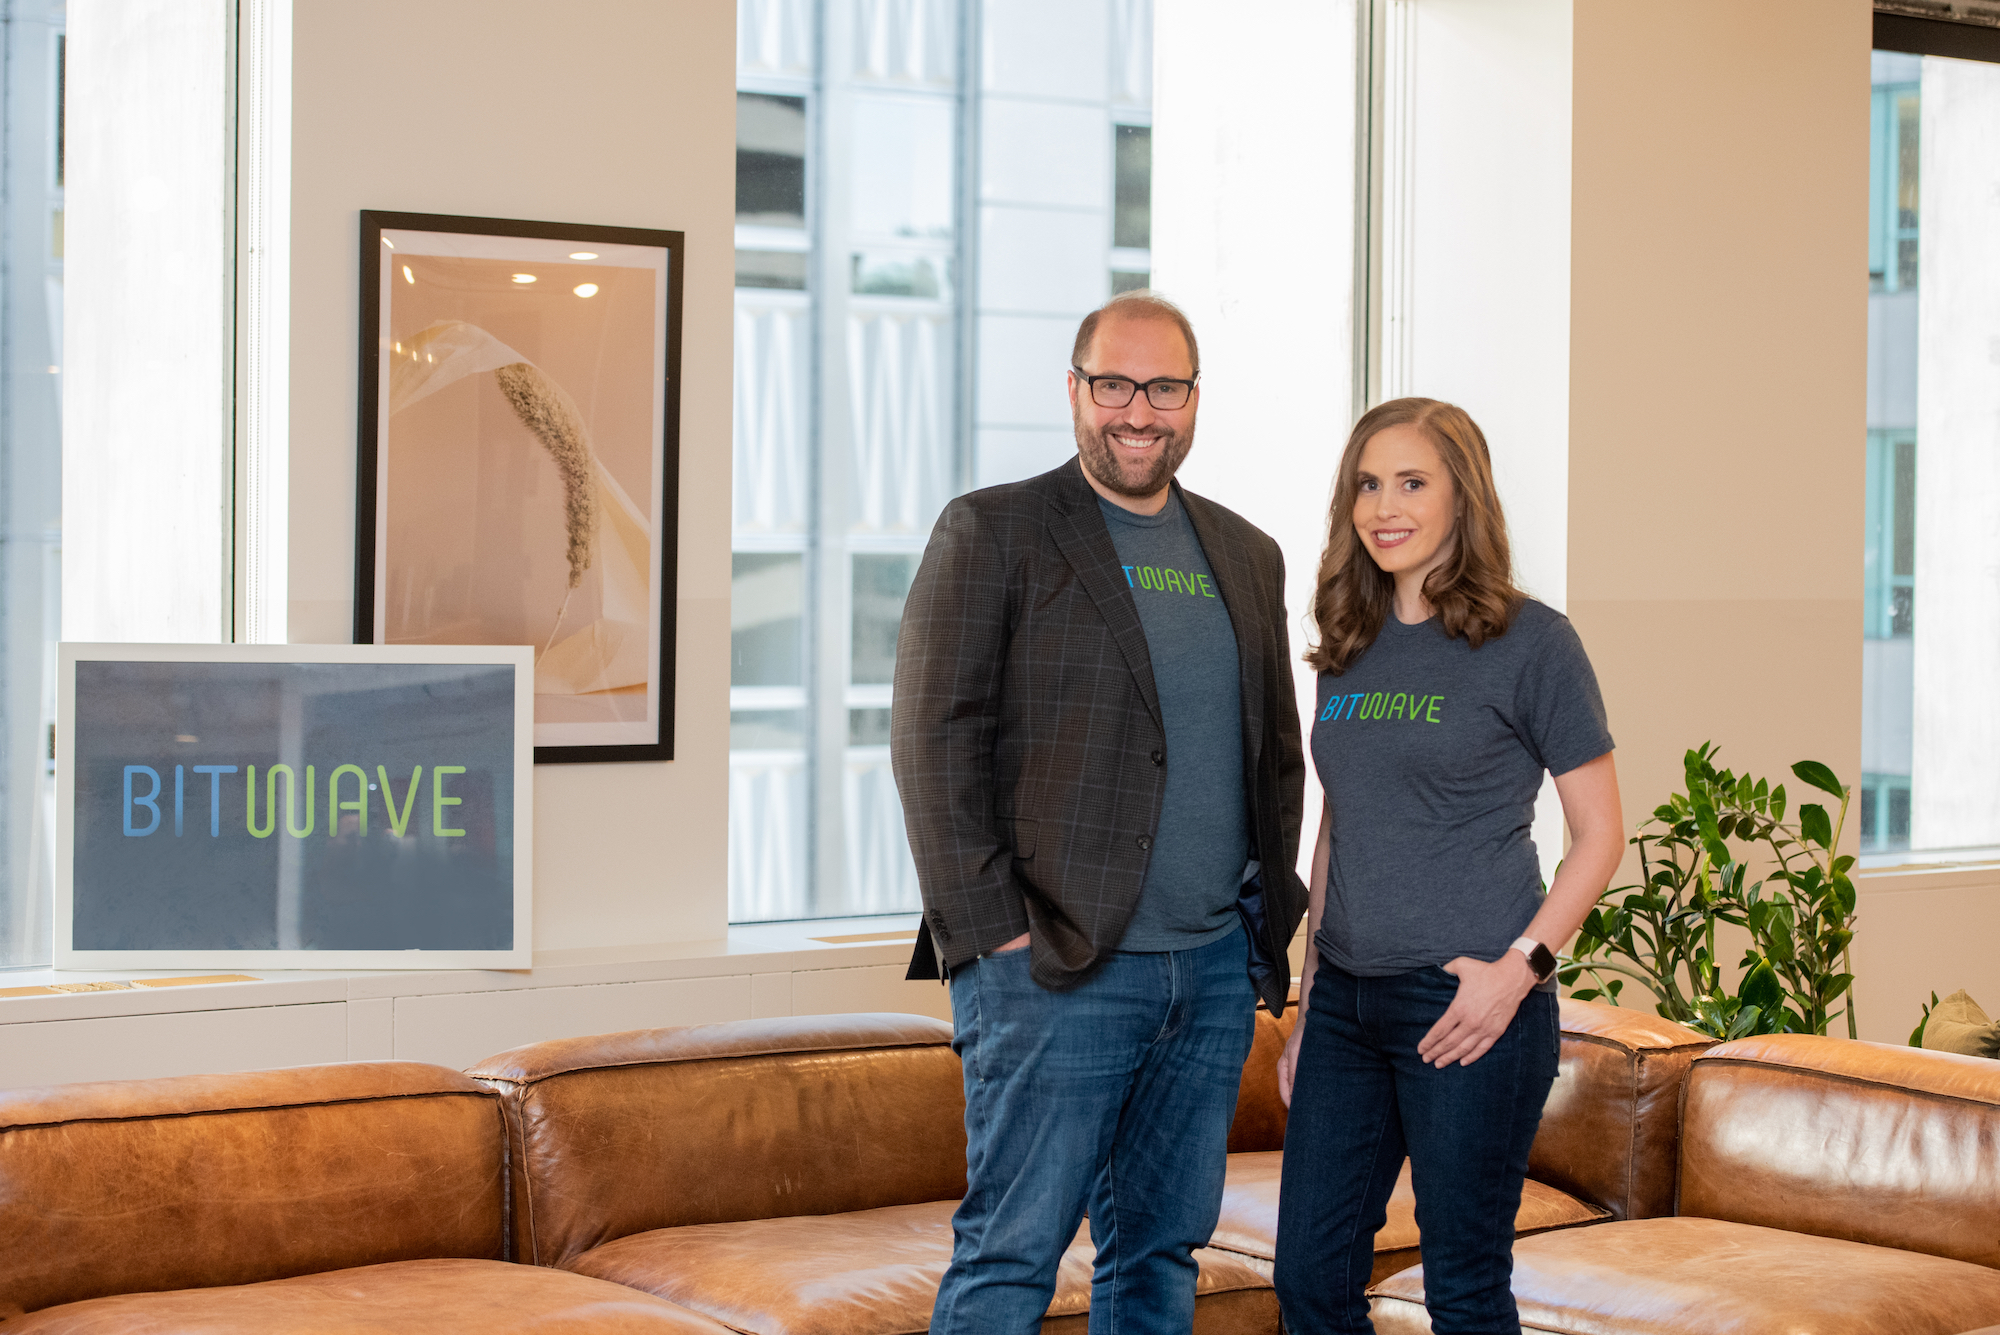 Bitwave's co-founders Pat White and Amy Kalnoki pose together for a photo.